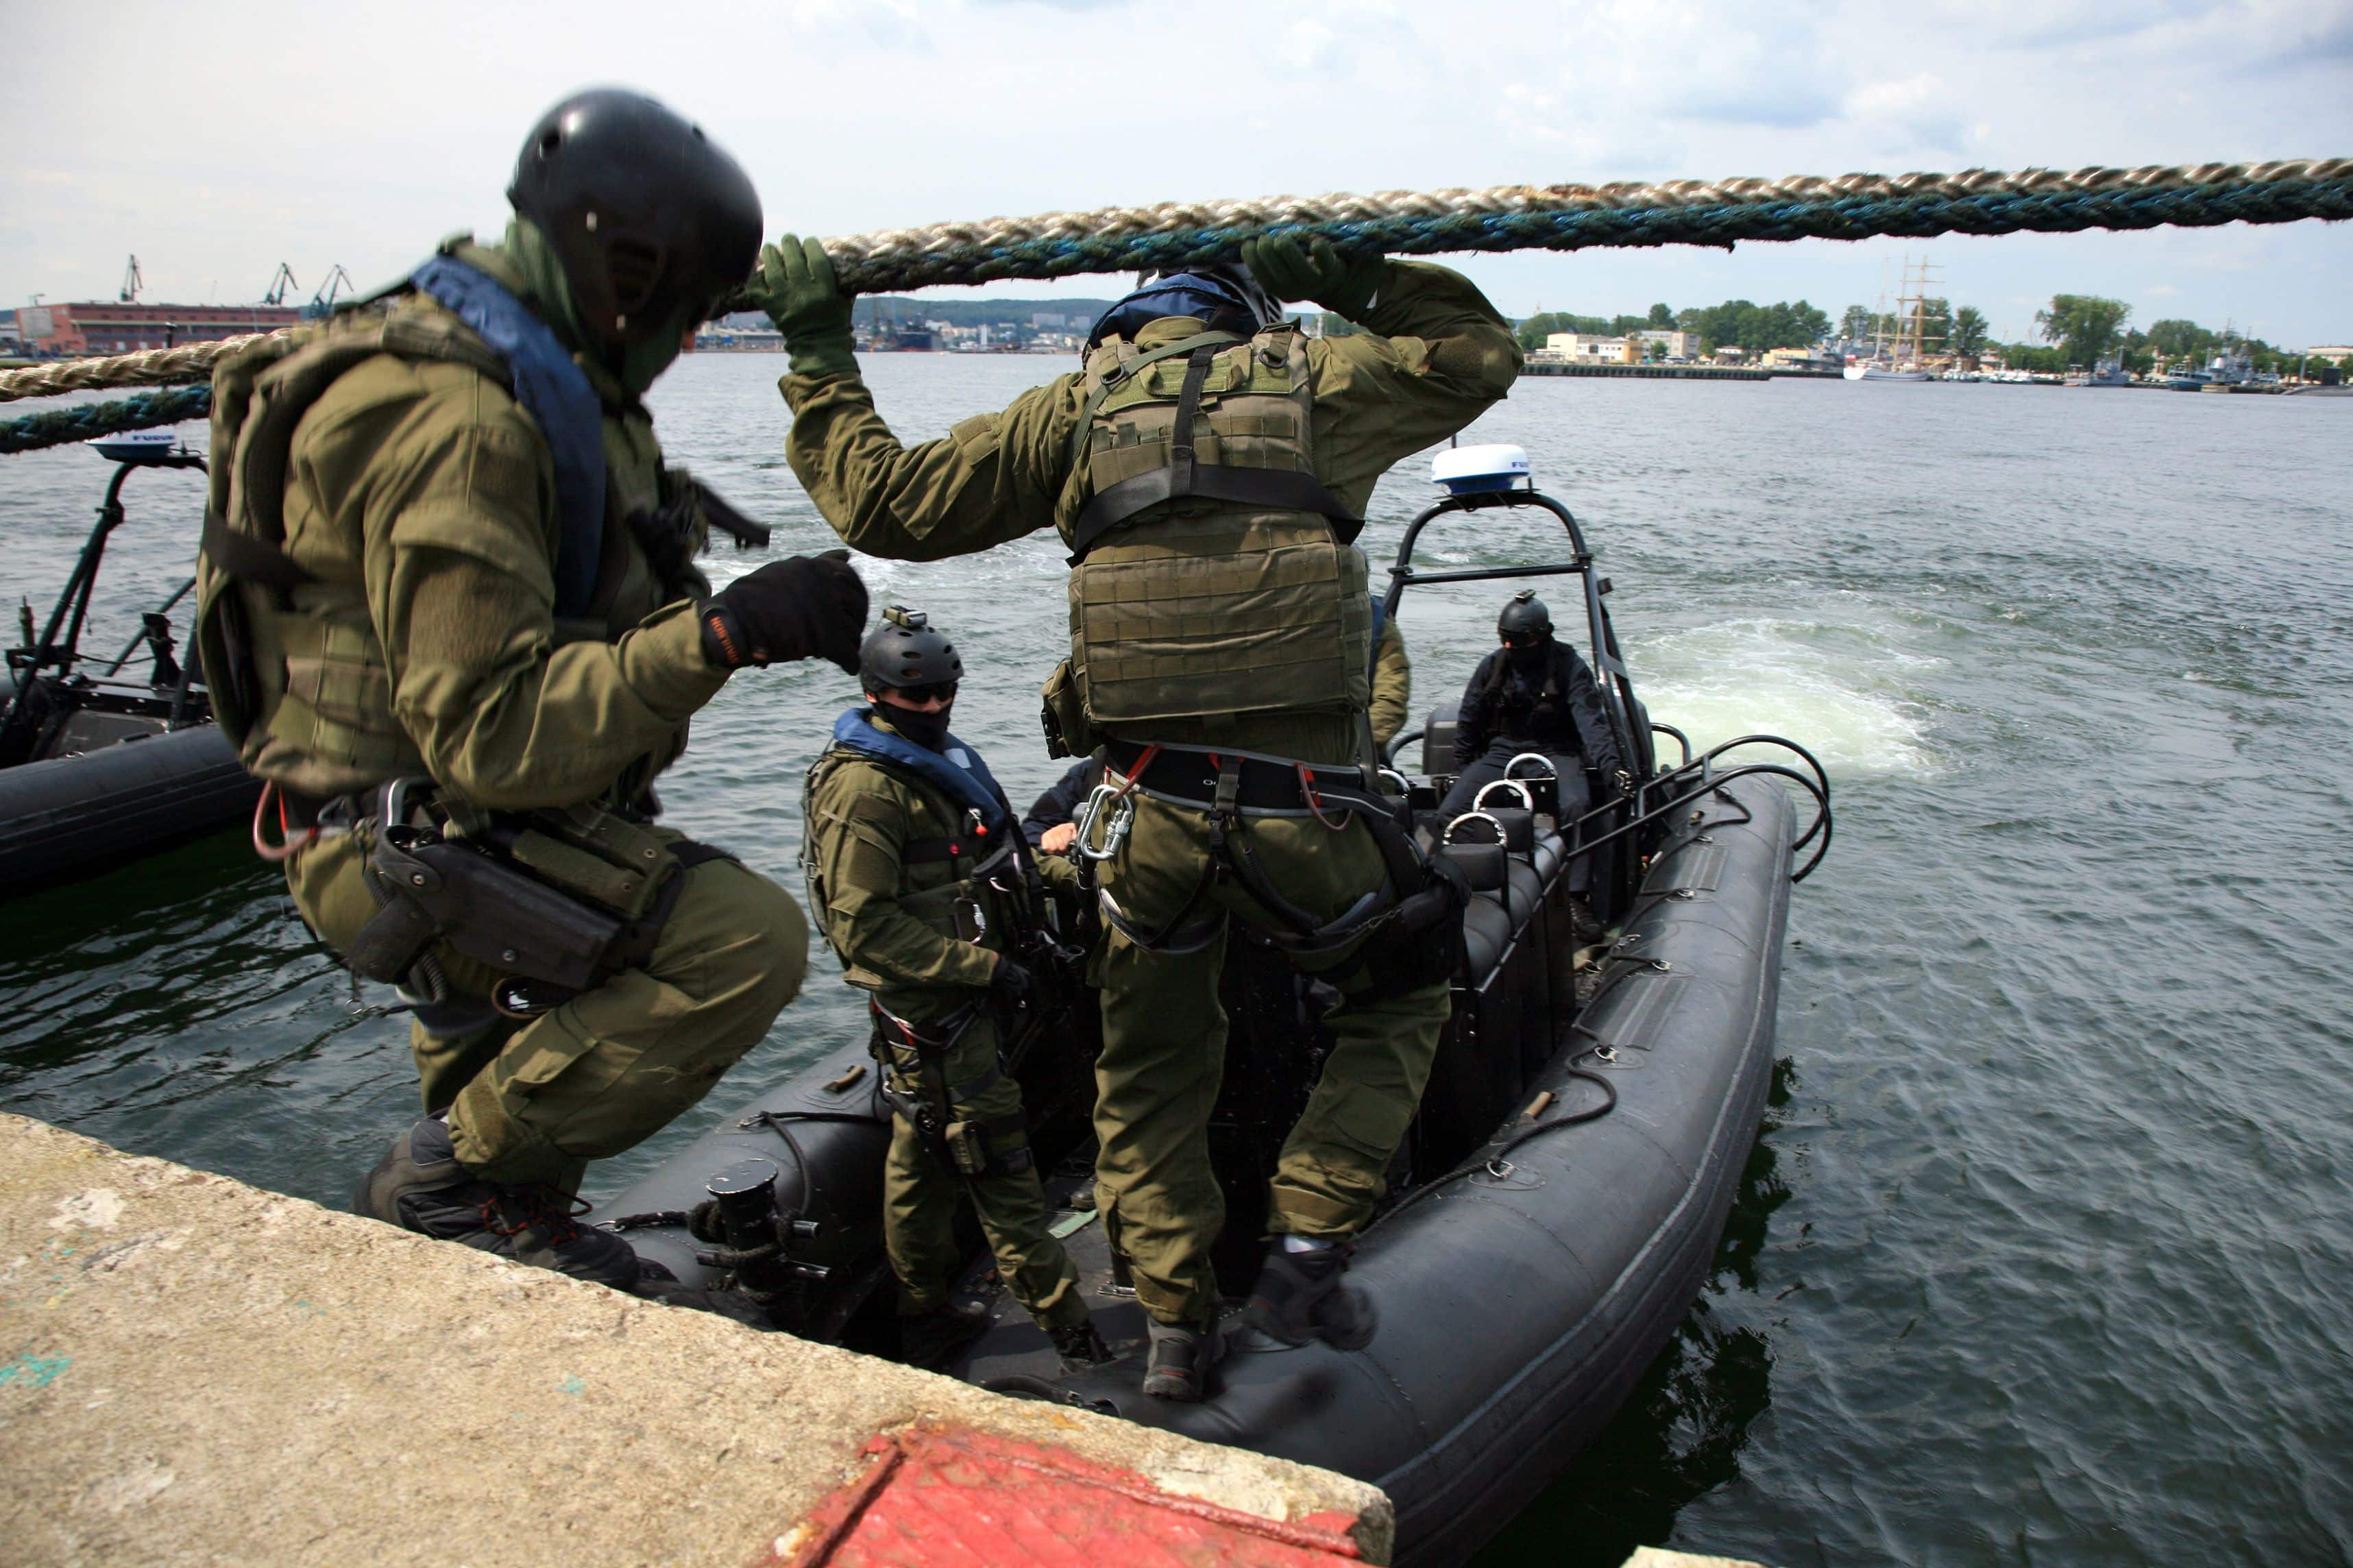 Boarding a ship – soldier. The Marine special forces to enter the ship to its search and hostage rescue – before training.